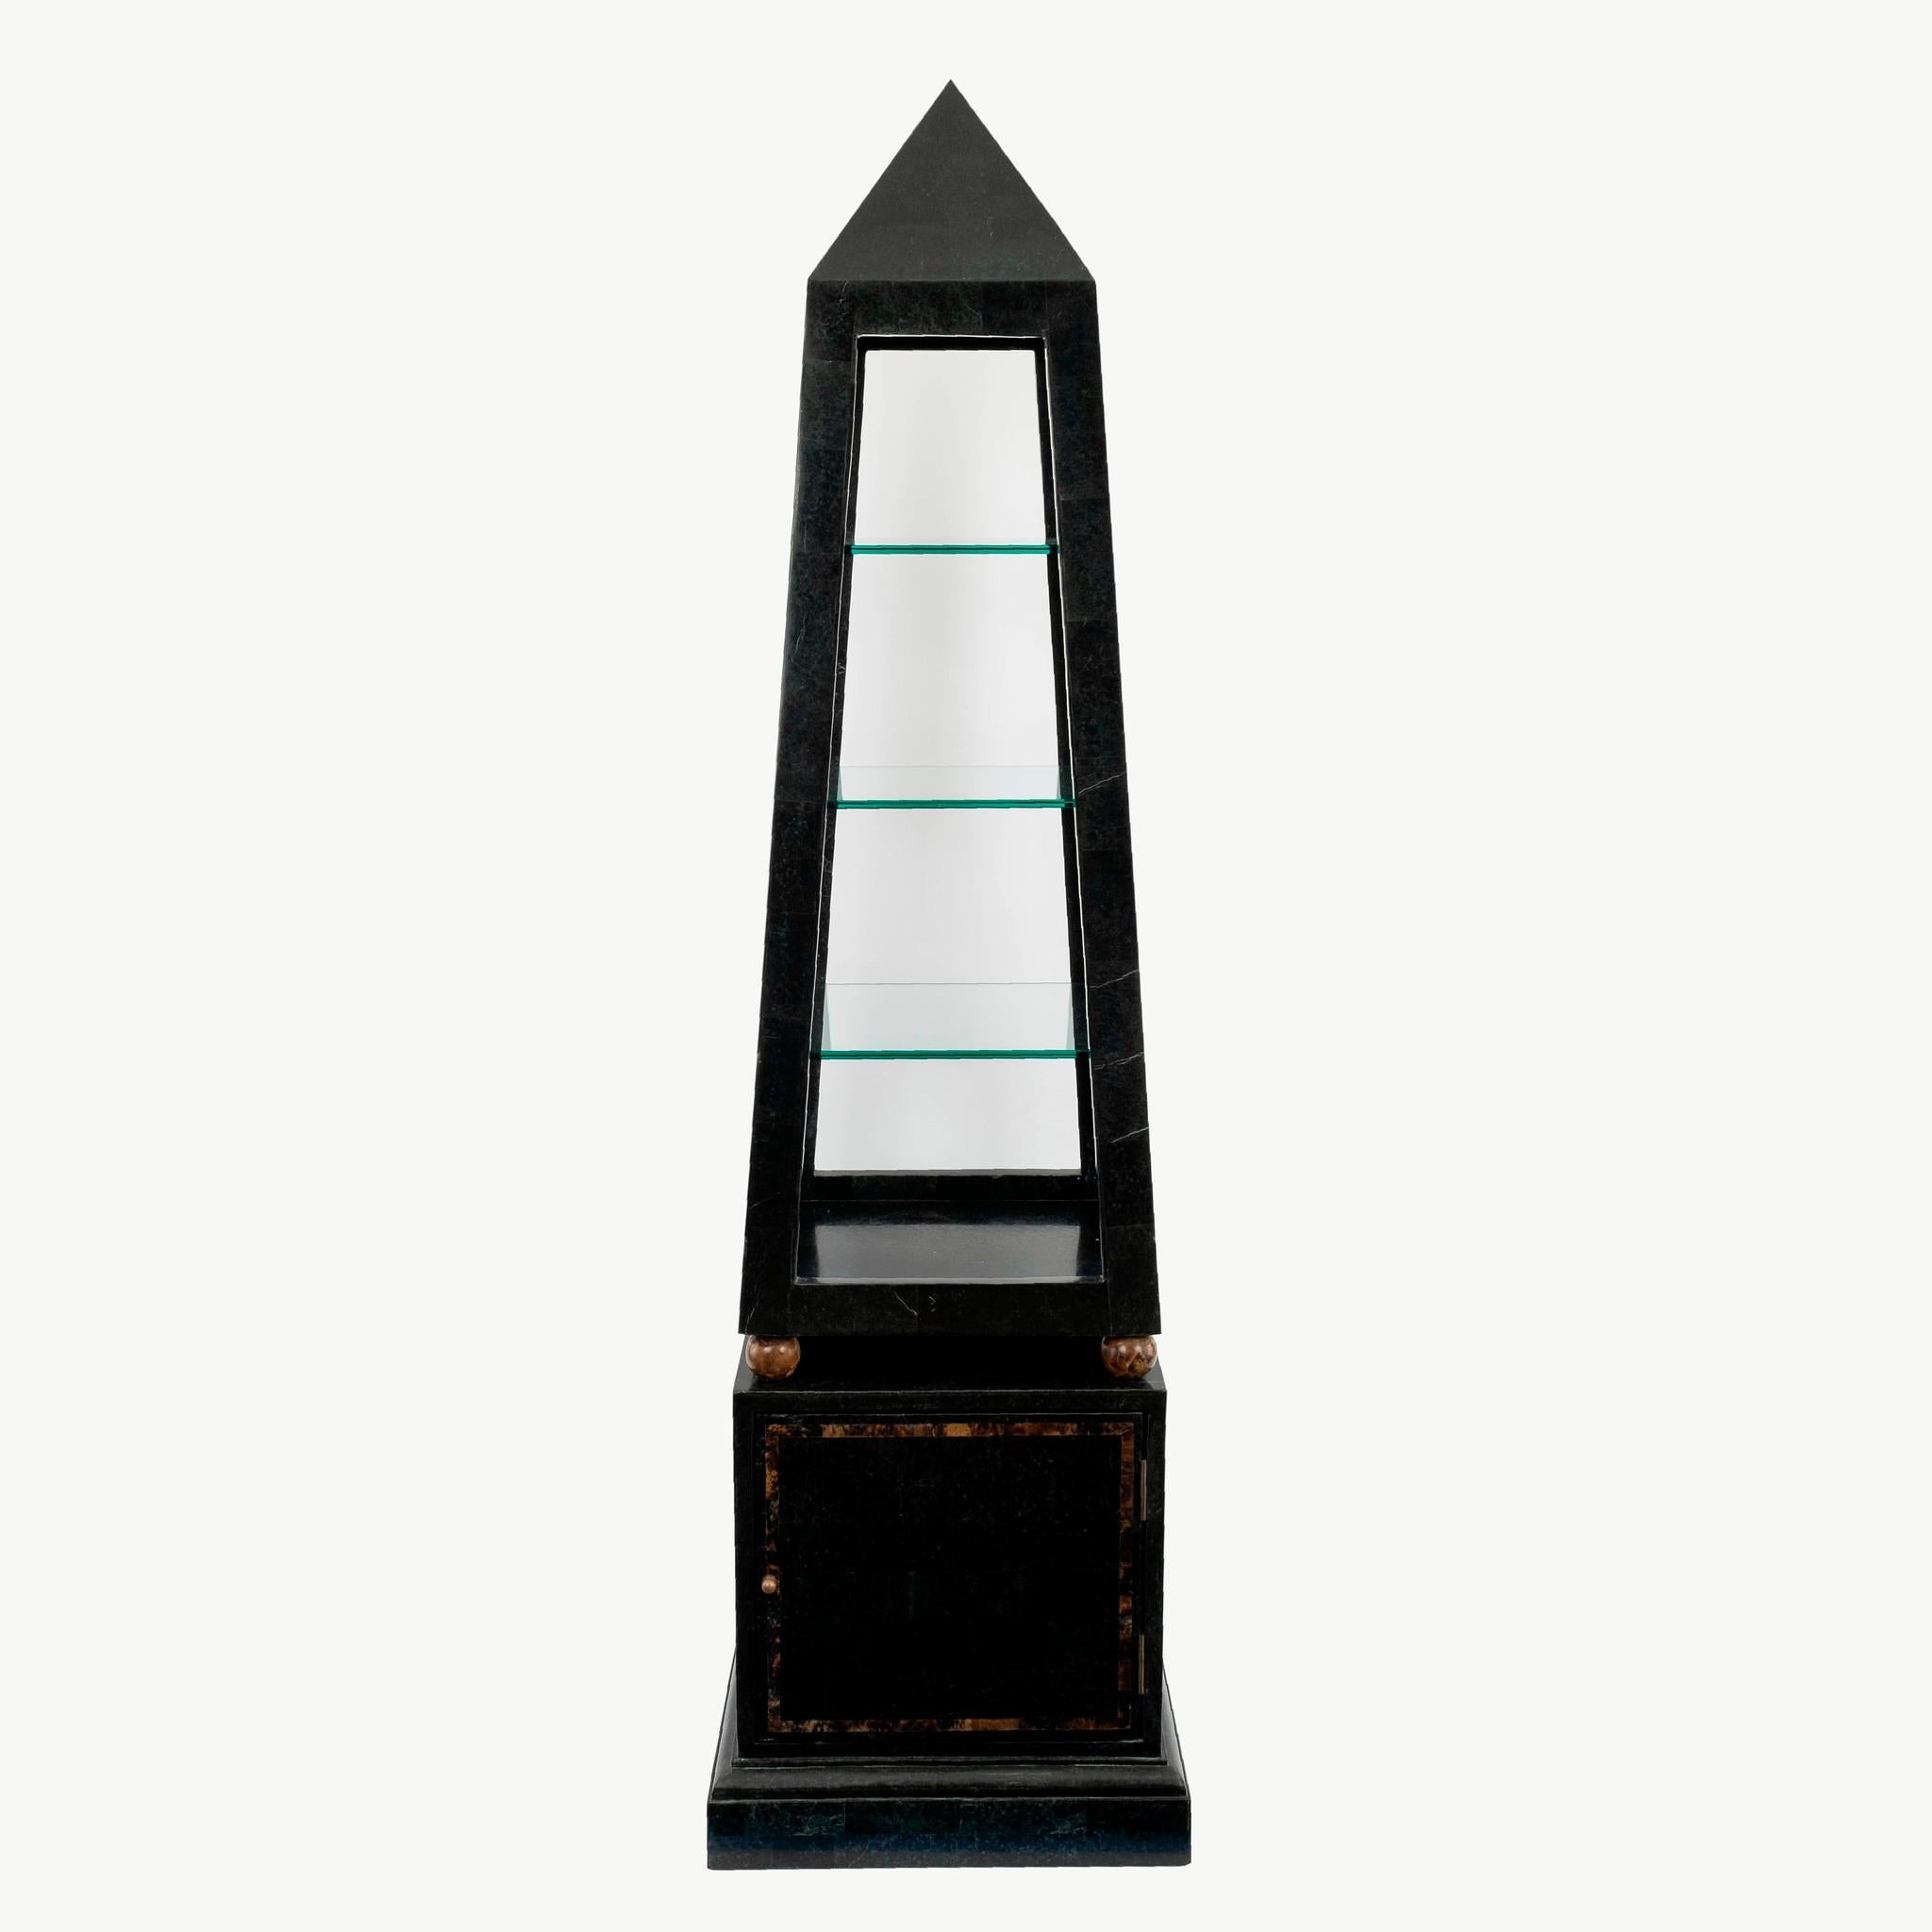 Vintage tessellated black marble and brass obelisk shaped etagere with three glass shelves and one cabinet door for storage.